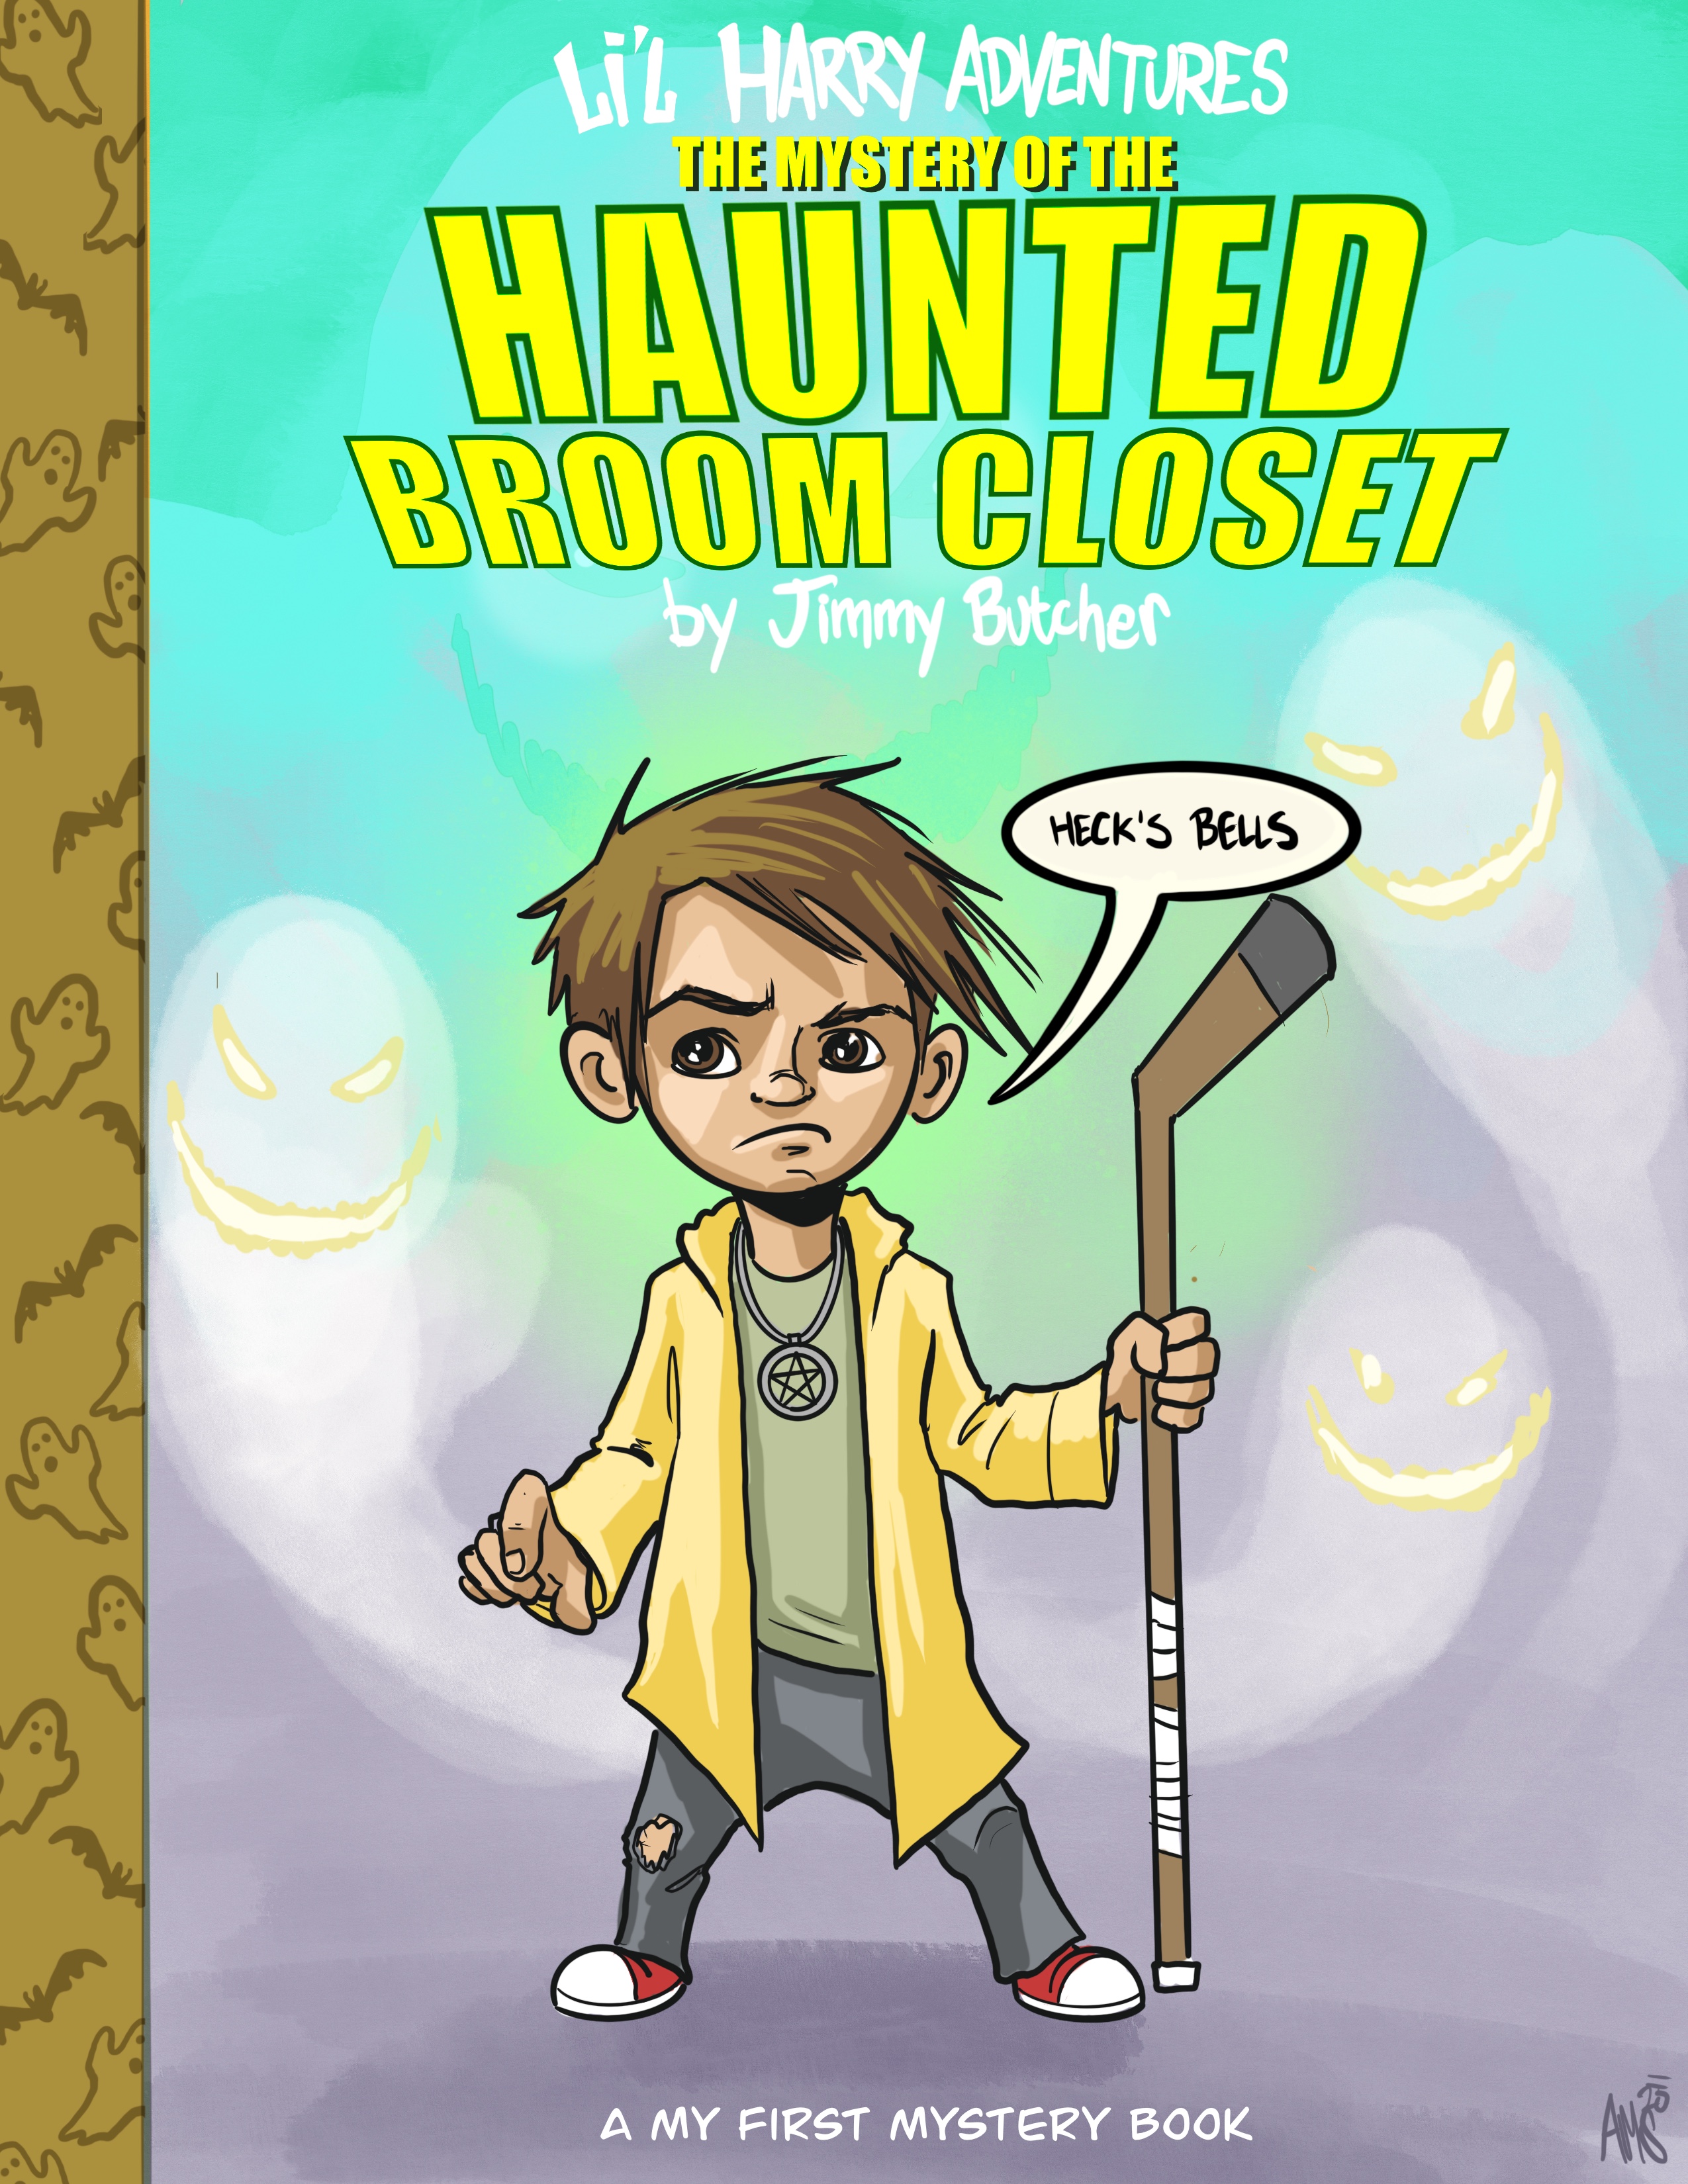 Li'l Harry Adventures: The Mystery of the Haunted Brook Closet